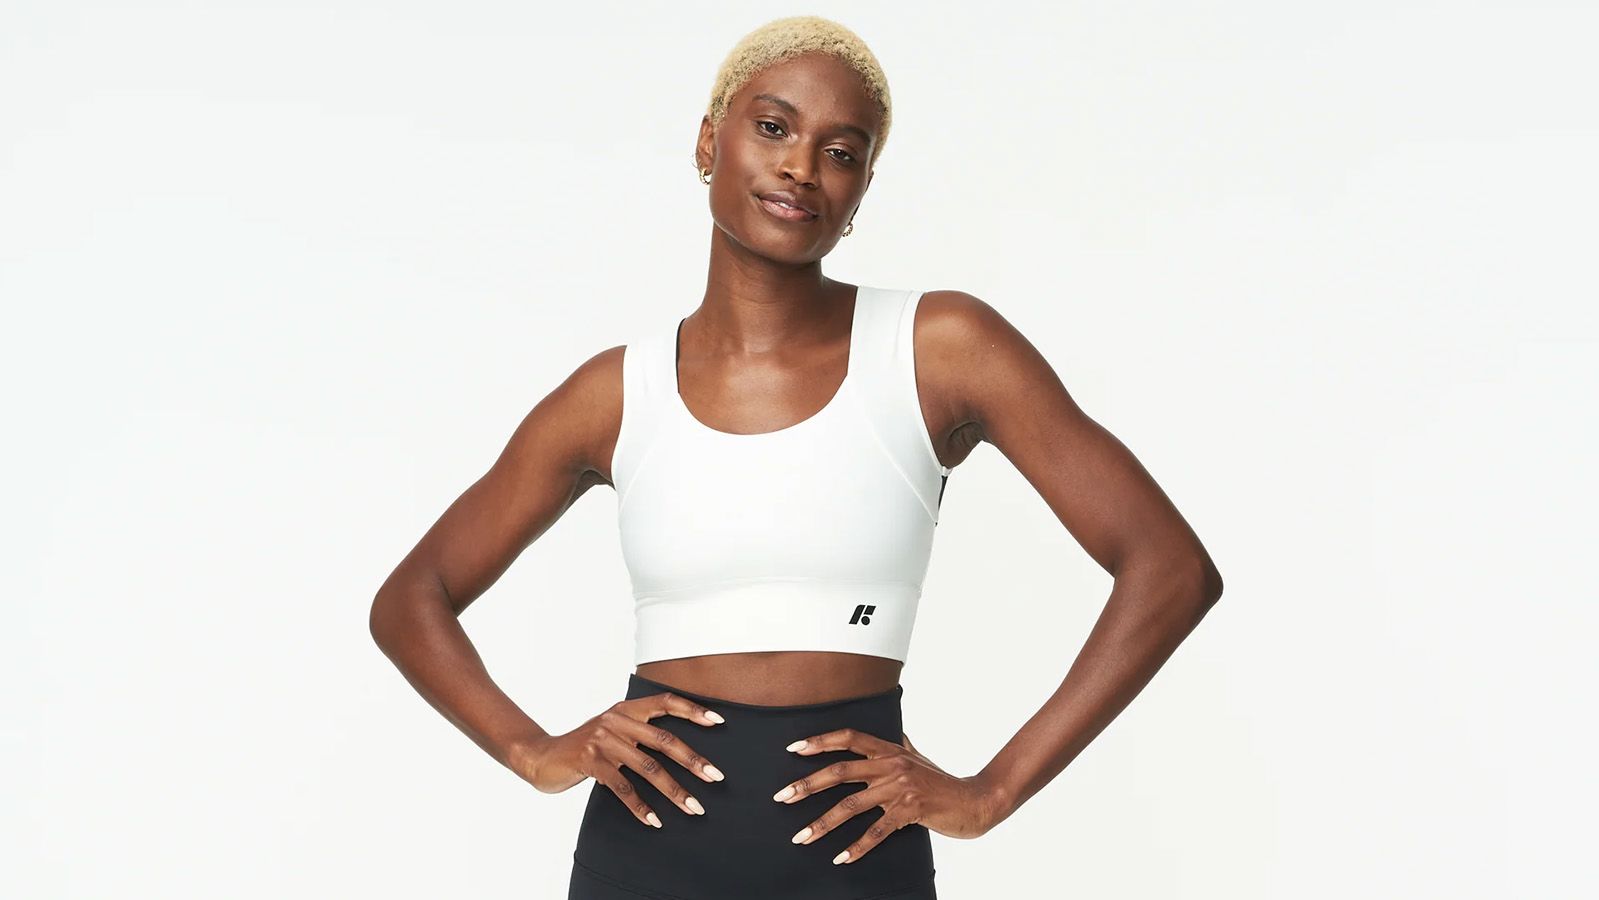 Formewear™ The Power Bra $159, Introducing Formewear™: the first-ever  Posture Correcting Activewear powered by patented technology. Experience  the benefits: •Improved appearance